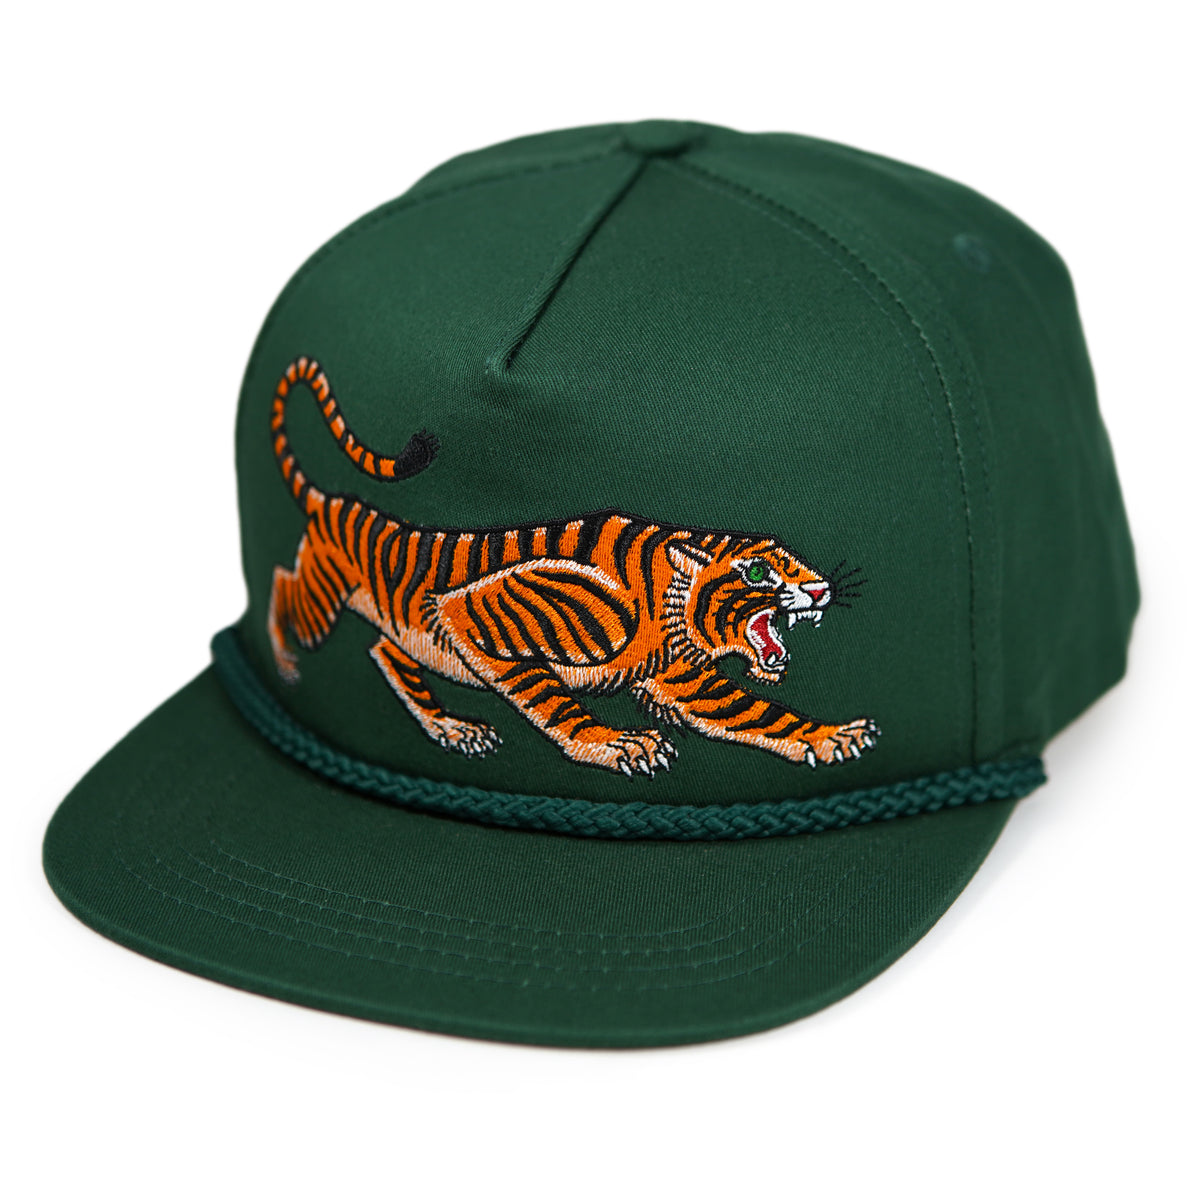 Tiger Structured Snapback Cap with Rope Front - Stuntin Goods